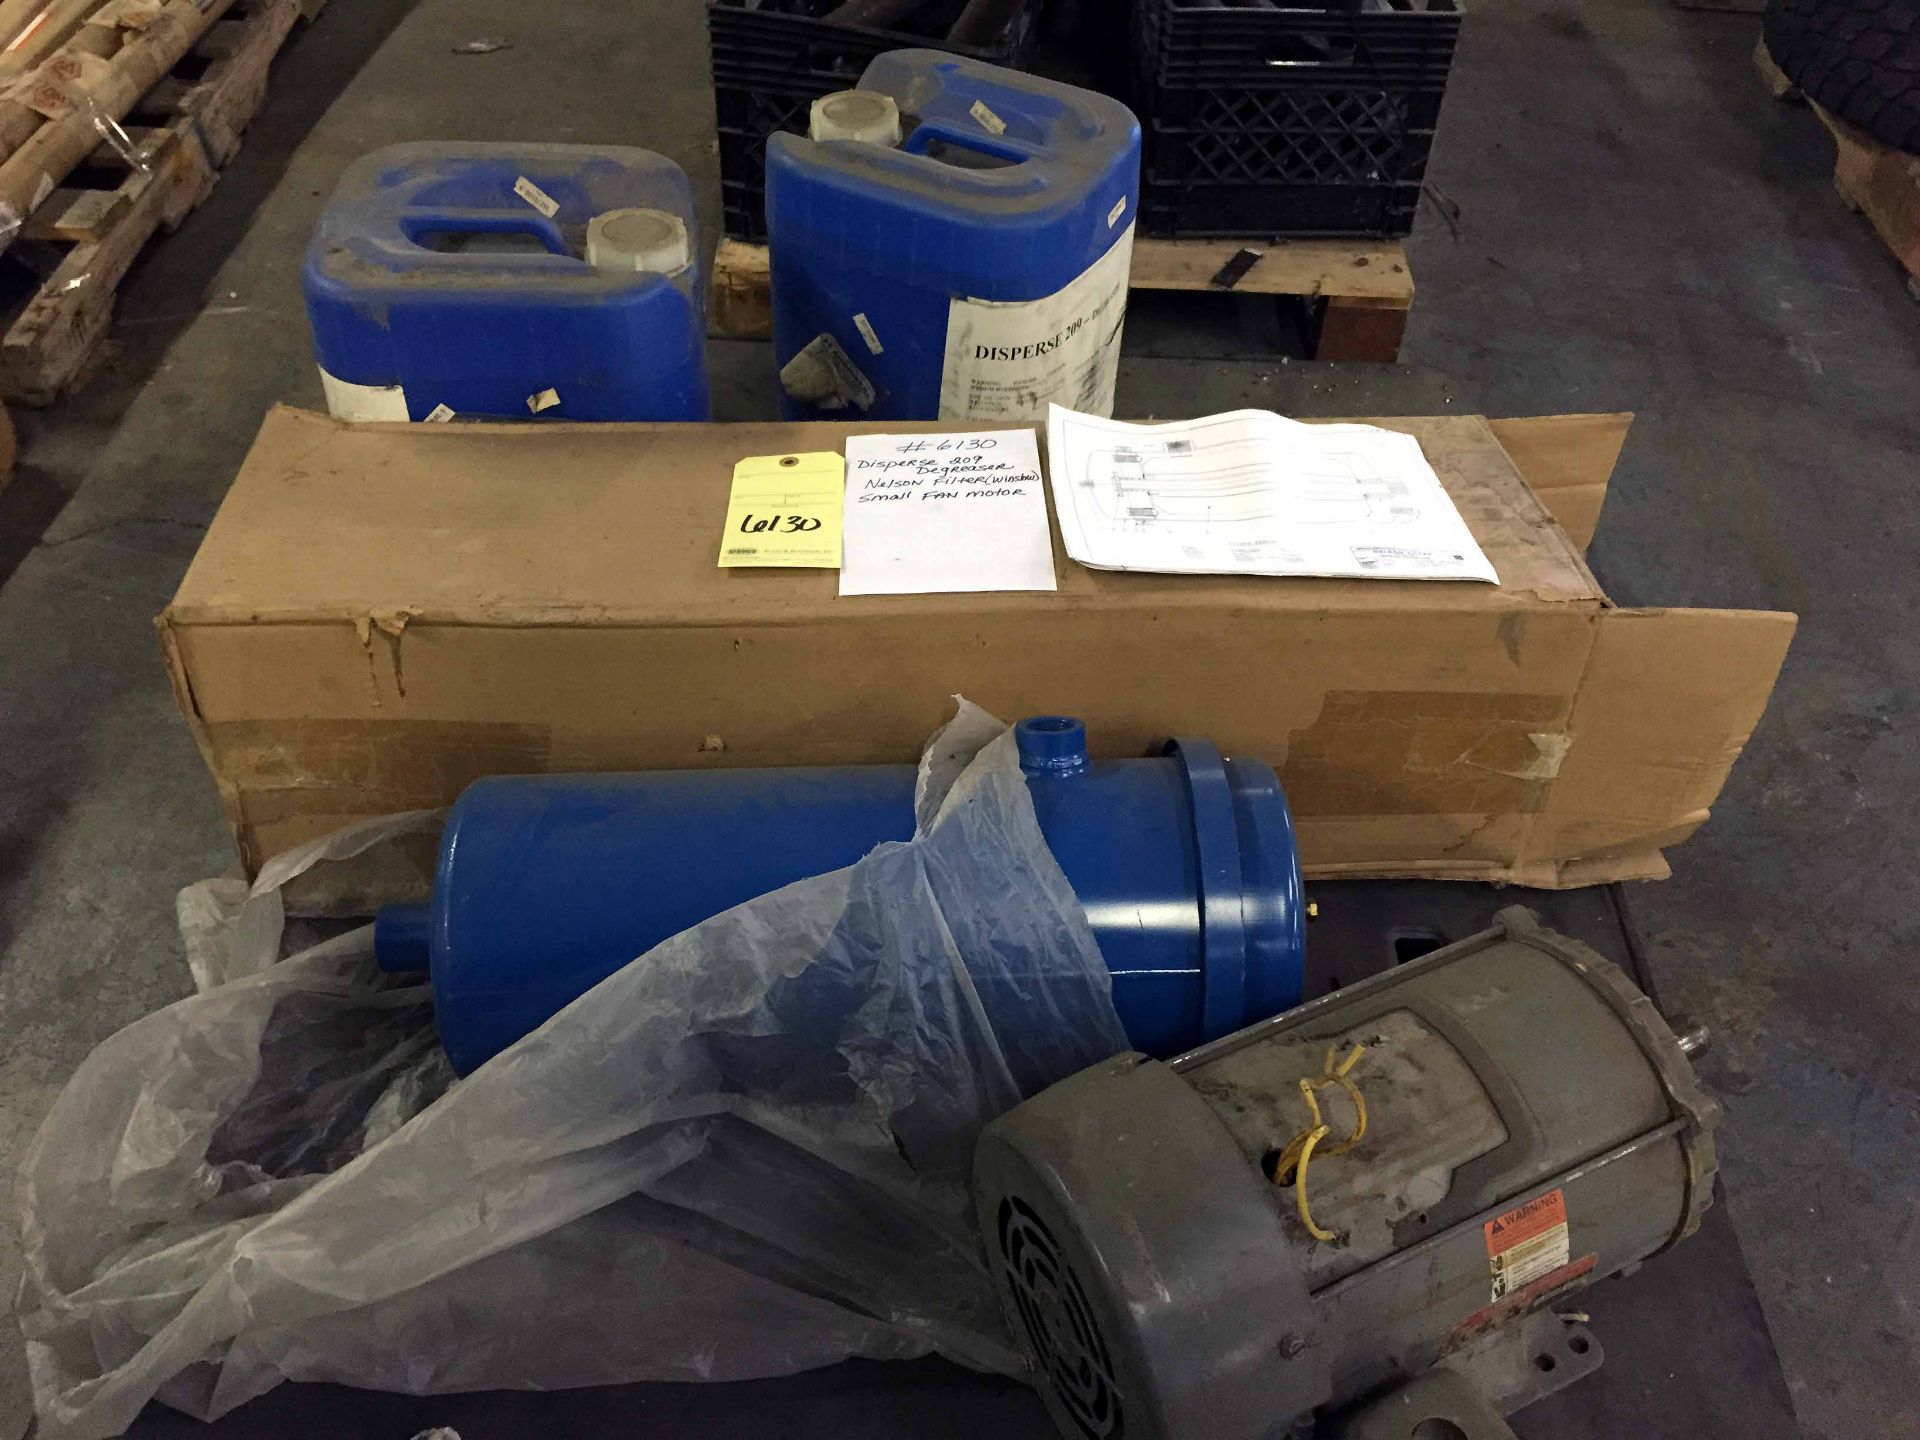 LOT CONSISTING OF DISPERSE 209 DEGREASER, NELSON FILTER (WINSLOW), SMALL FAN MOTOR LOCATED IN